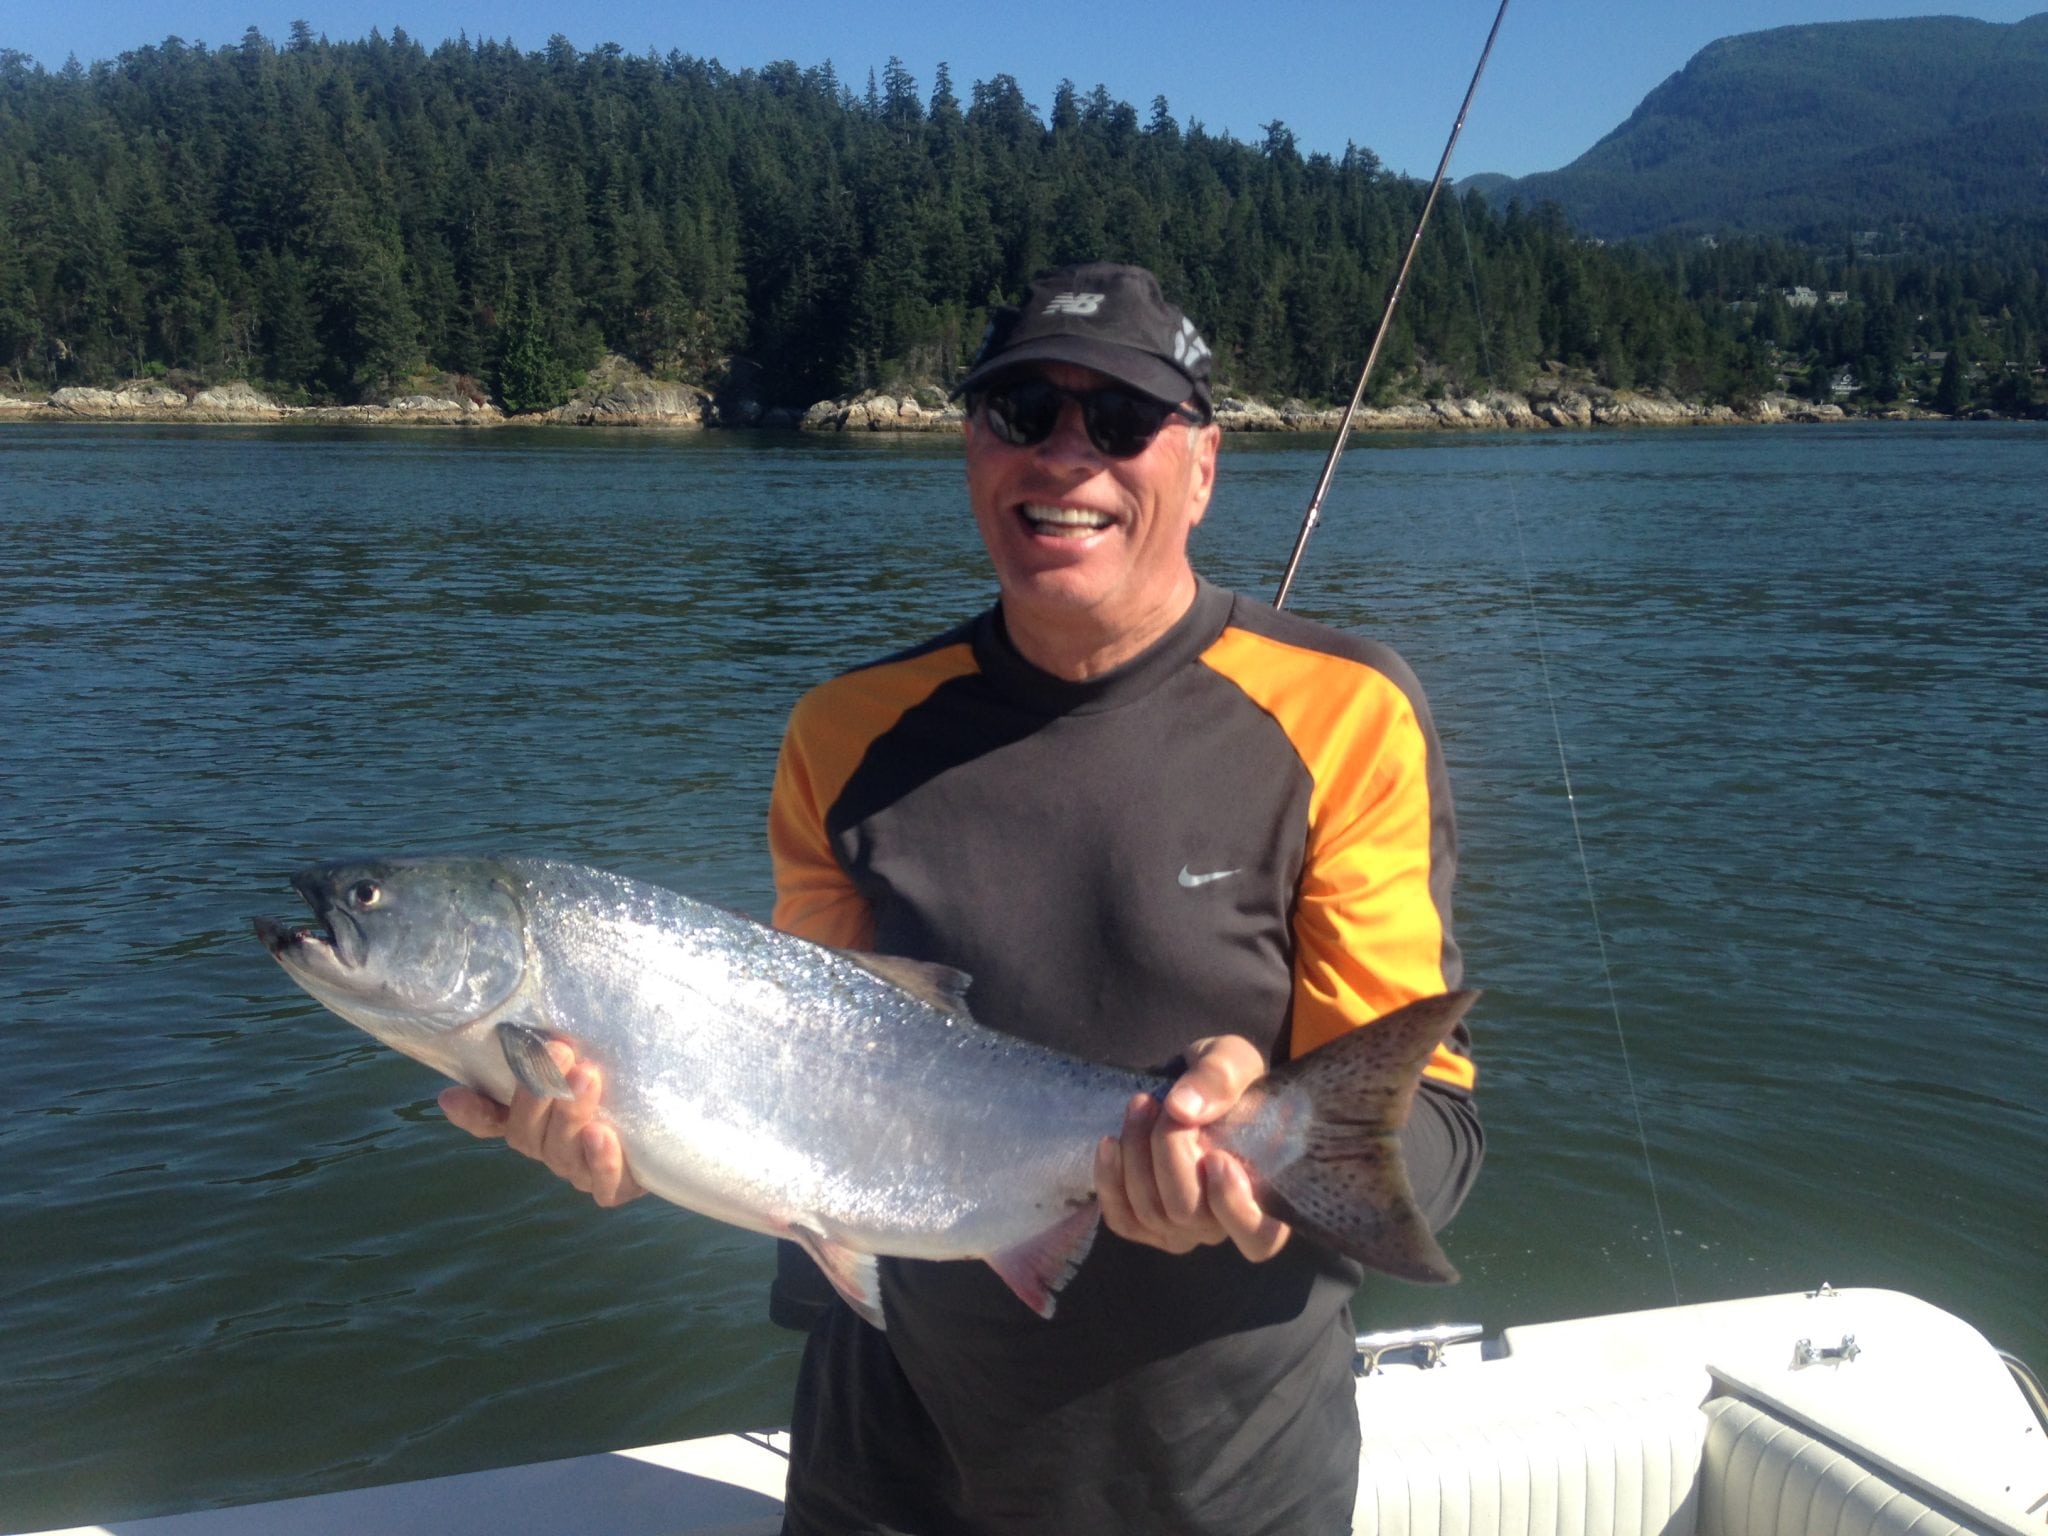 Peter with a nice chinook landed earlier this week.